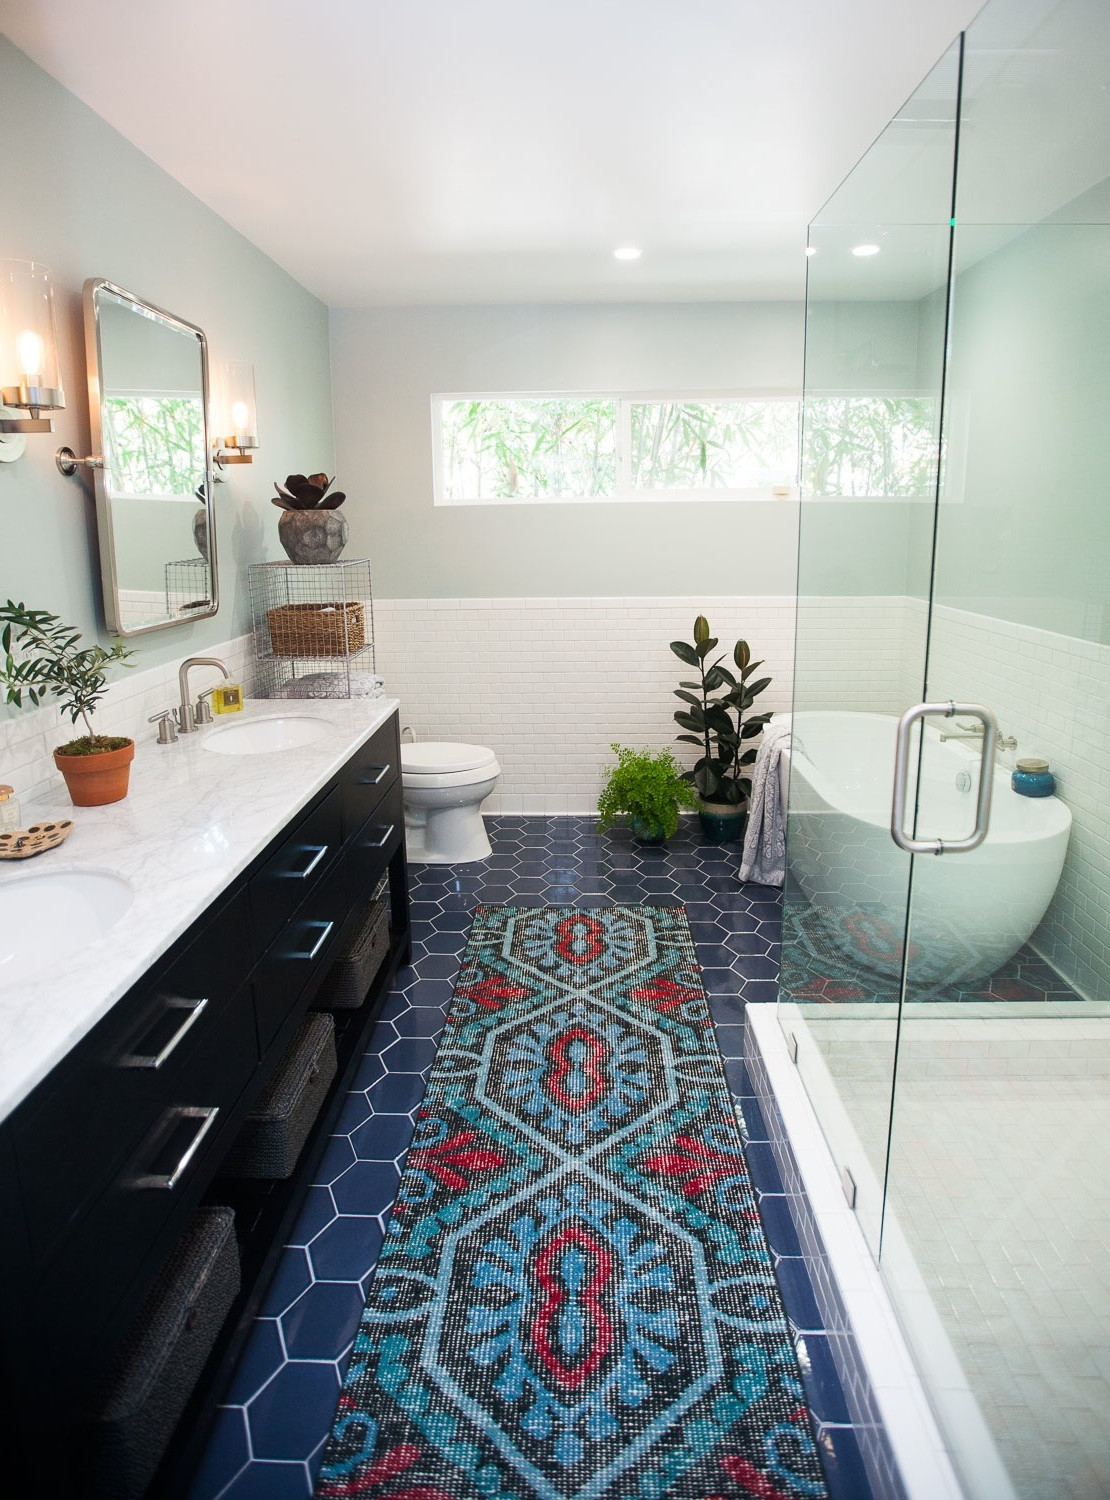 Photos Of Bathroom Remodels
 Master Bathroom Renovation Before After — The